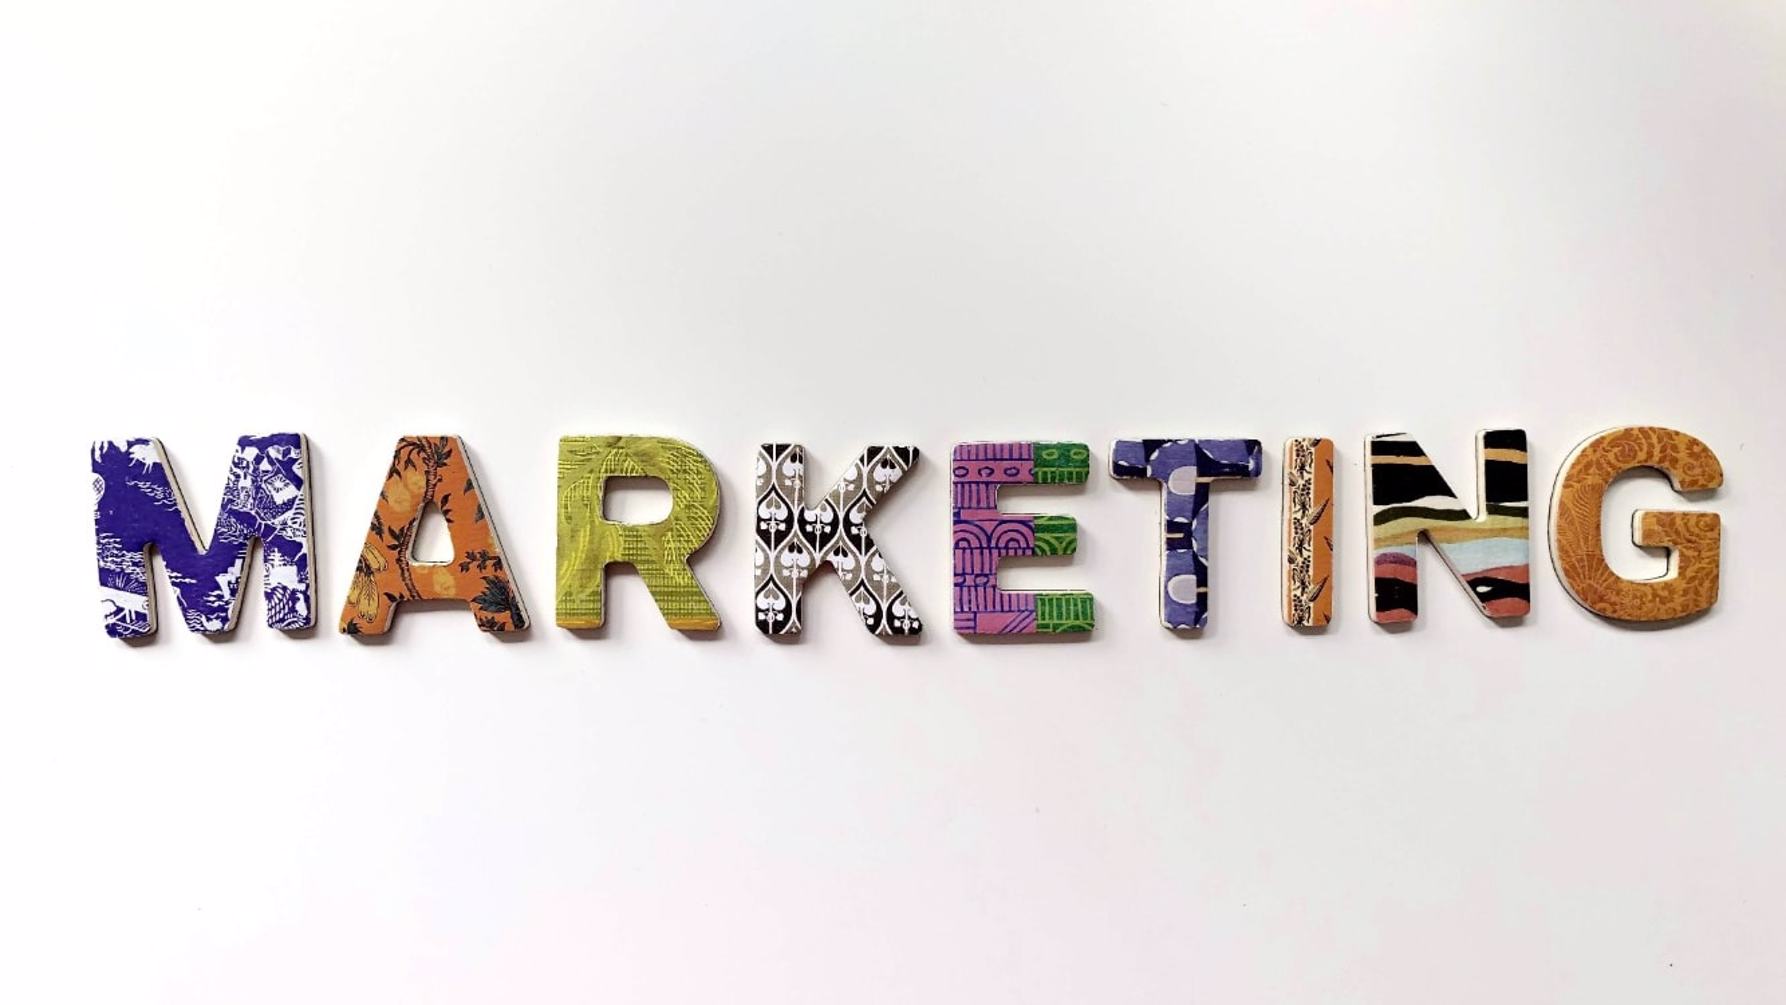 colorful block letters spelling out "marketing"